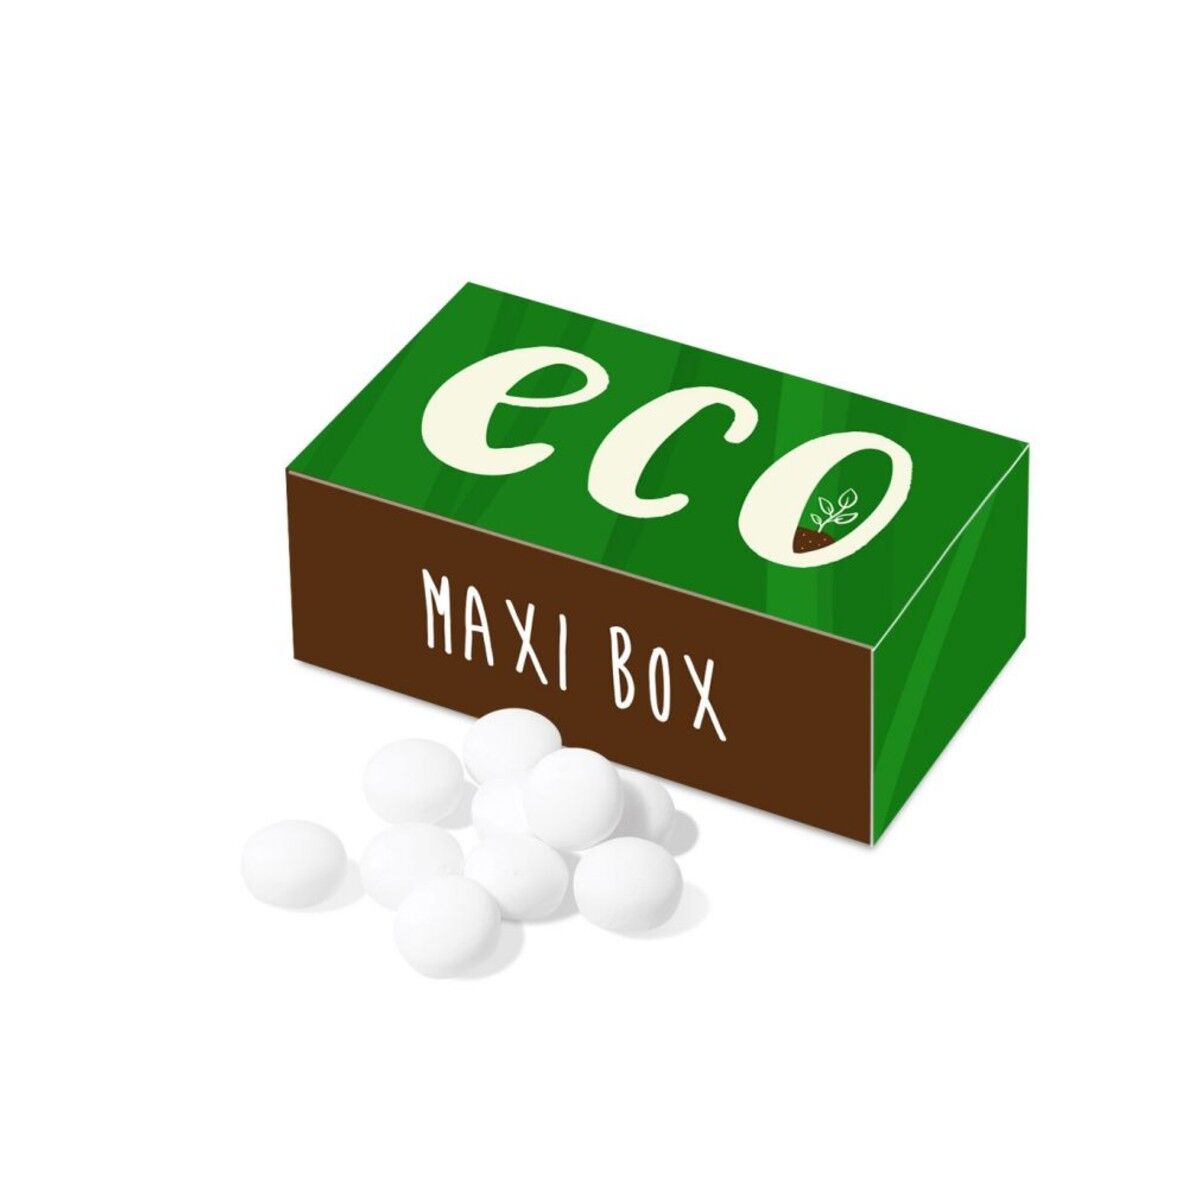 Maxi Confectionery Box filled with Mint Imperials